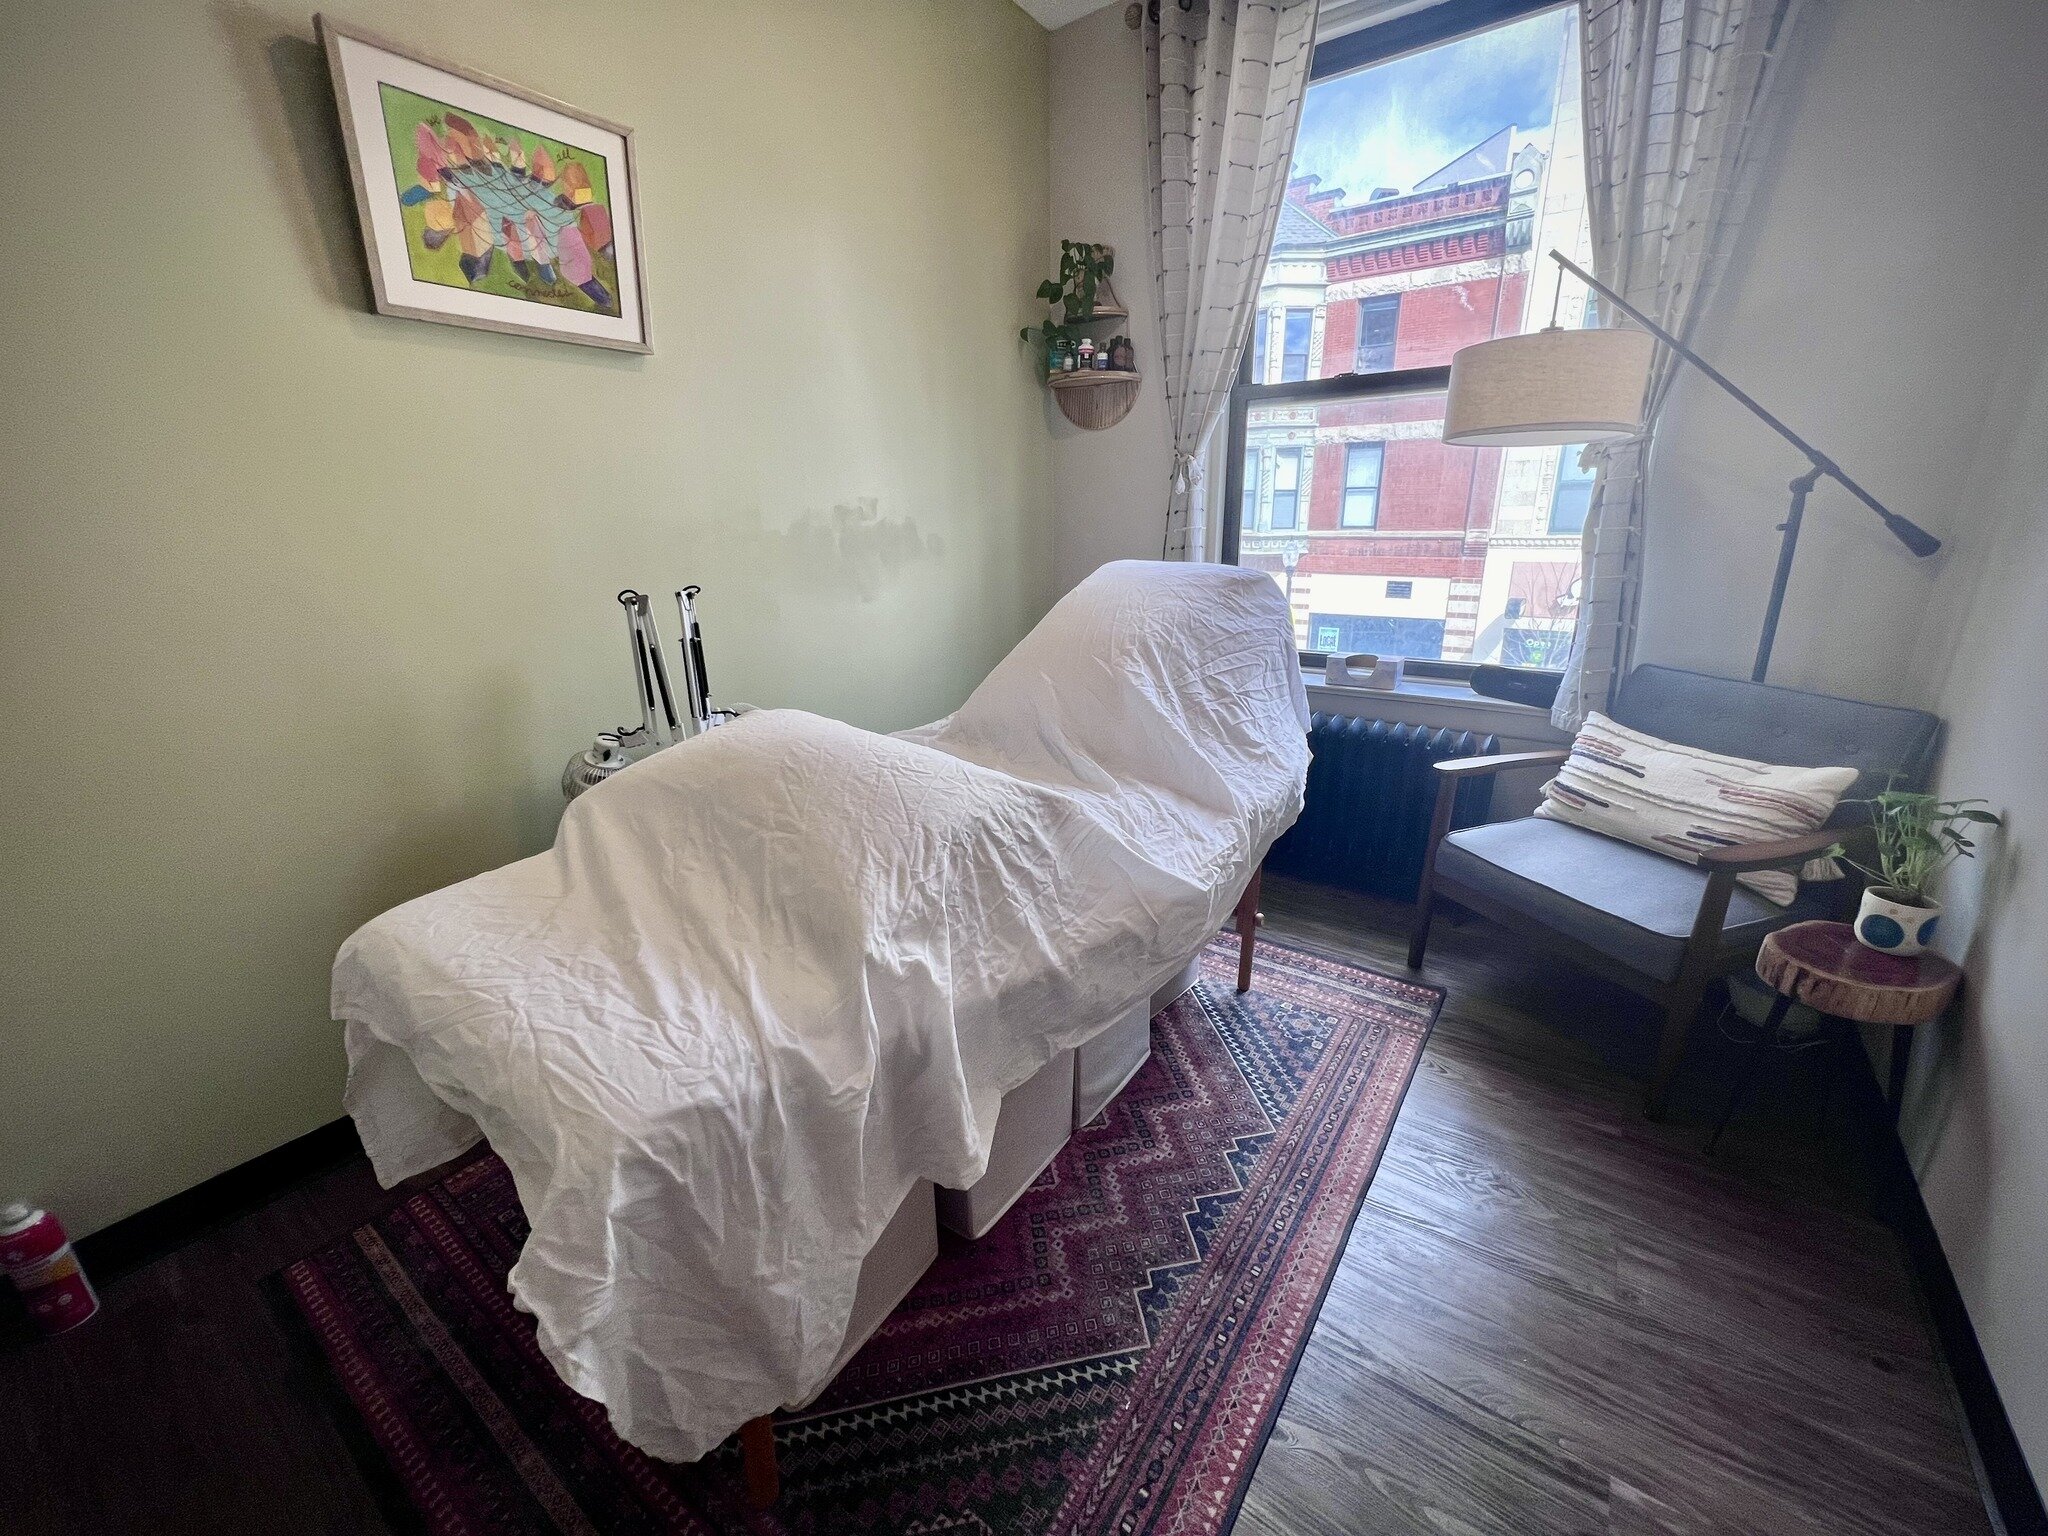 Did you know that acupuncture is SAFE and even ENCOURAGED during pregnancy? 

I have worked with many folks on things like nausea, fatigue, pain, miscarriage prevention, and really anything else that can come up. Many of my patients report their preg